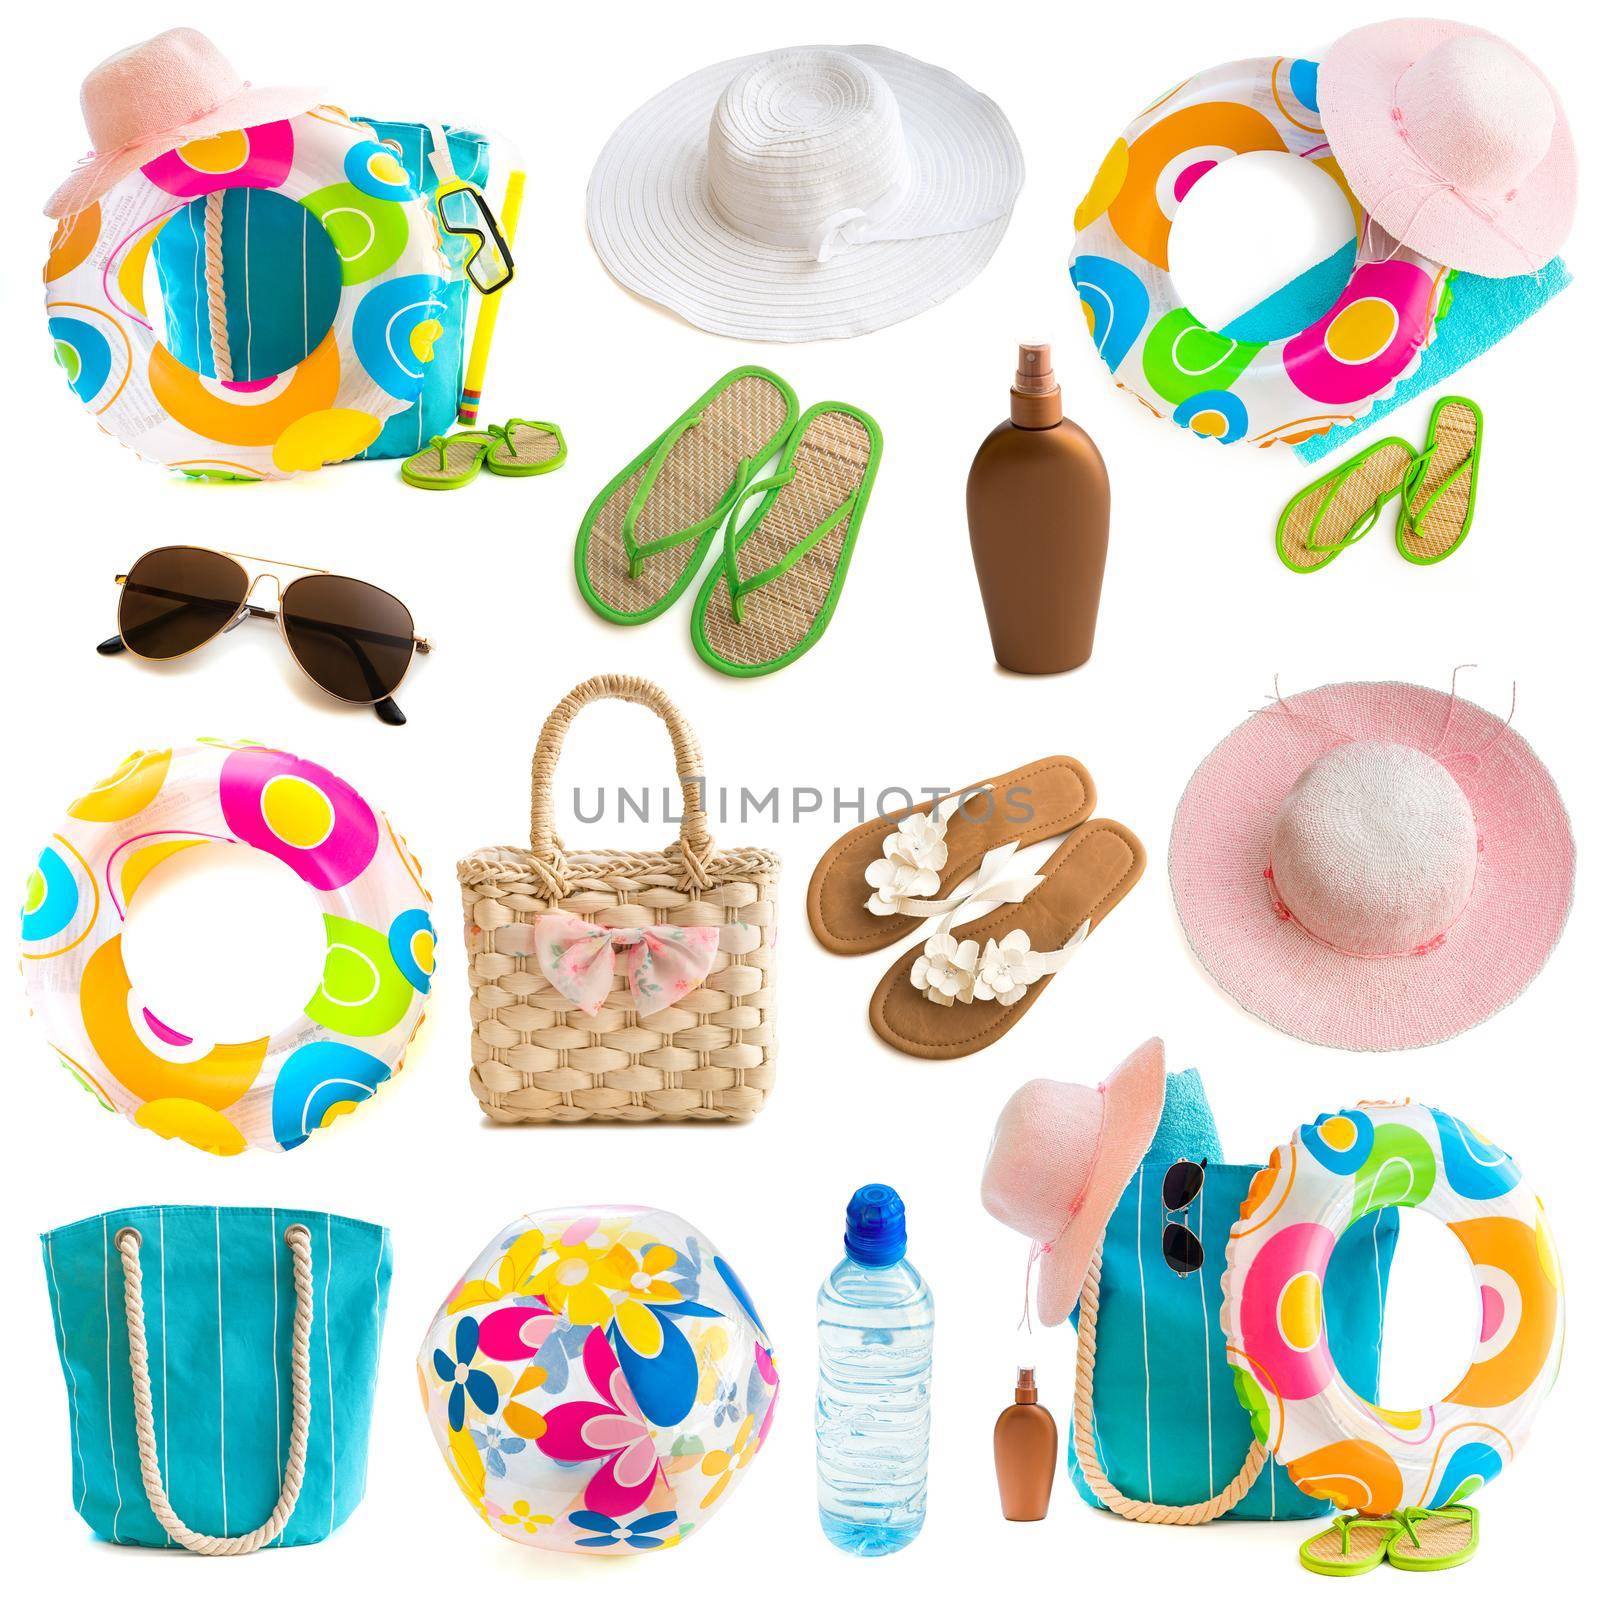 Photo collage of beach accessories and toys on a white background